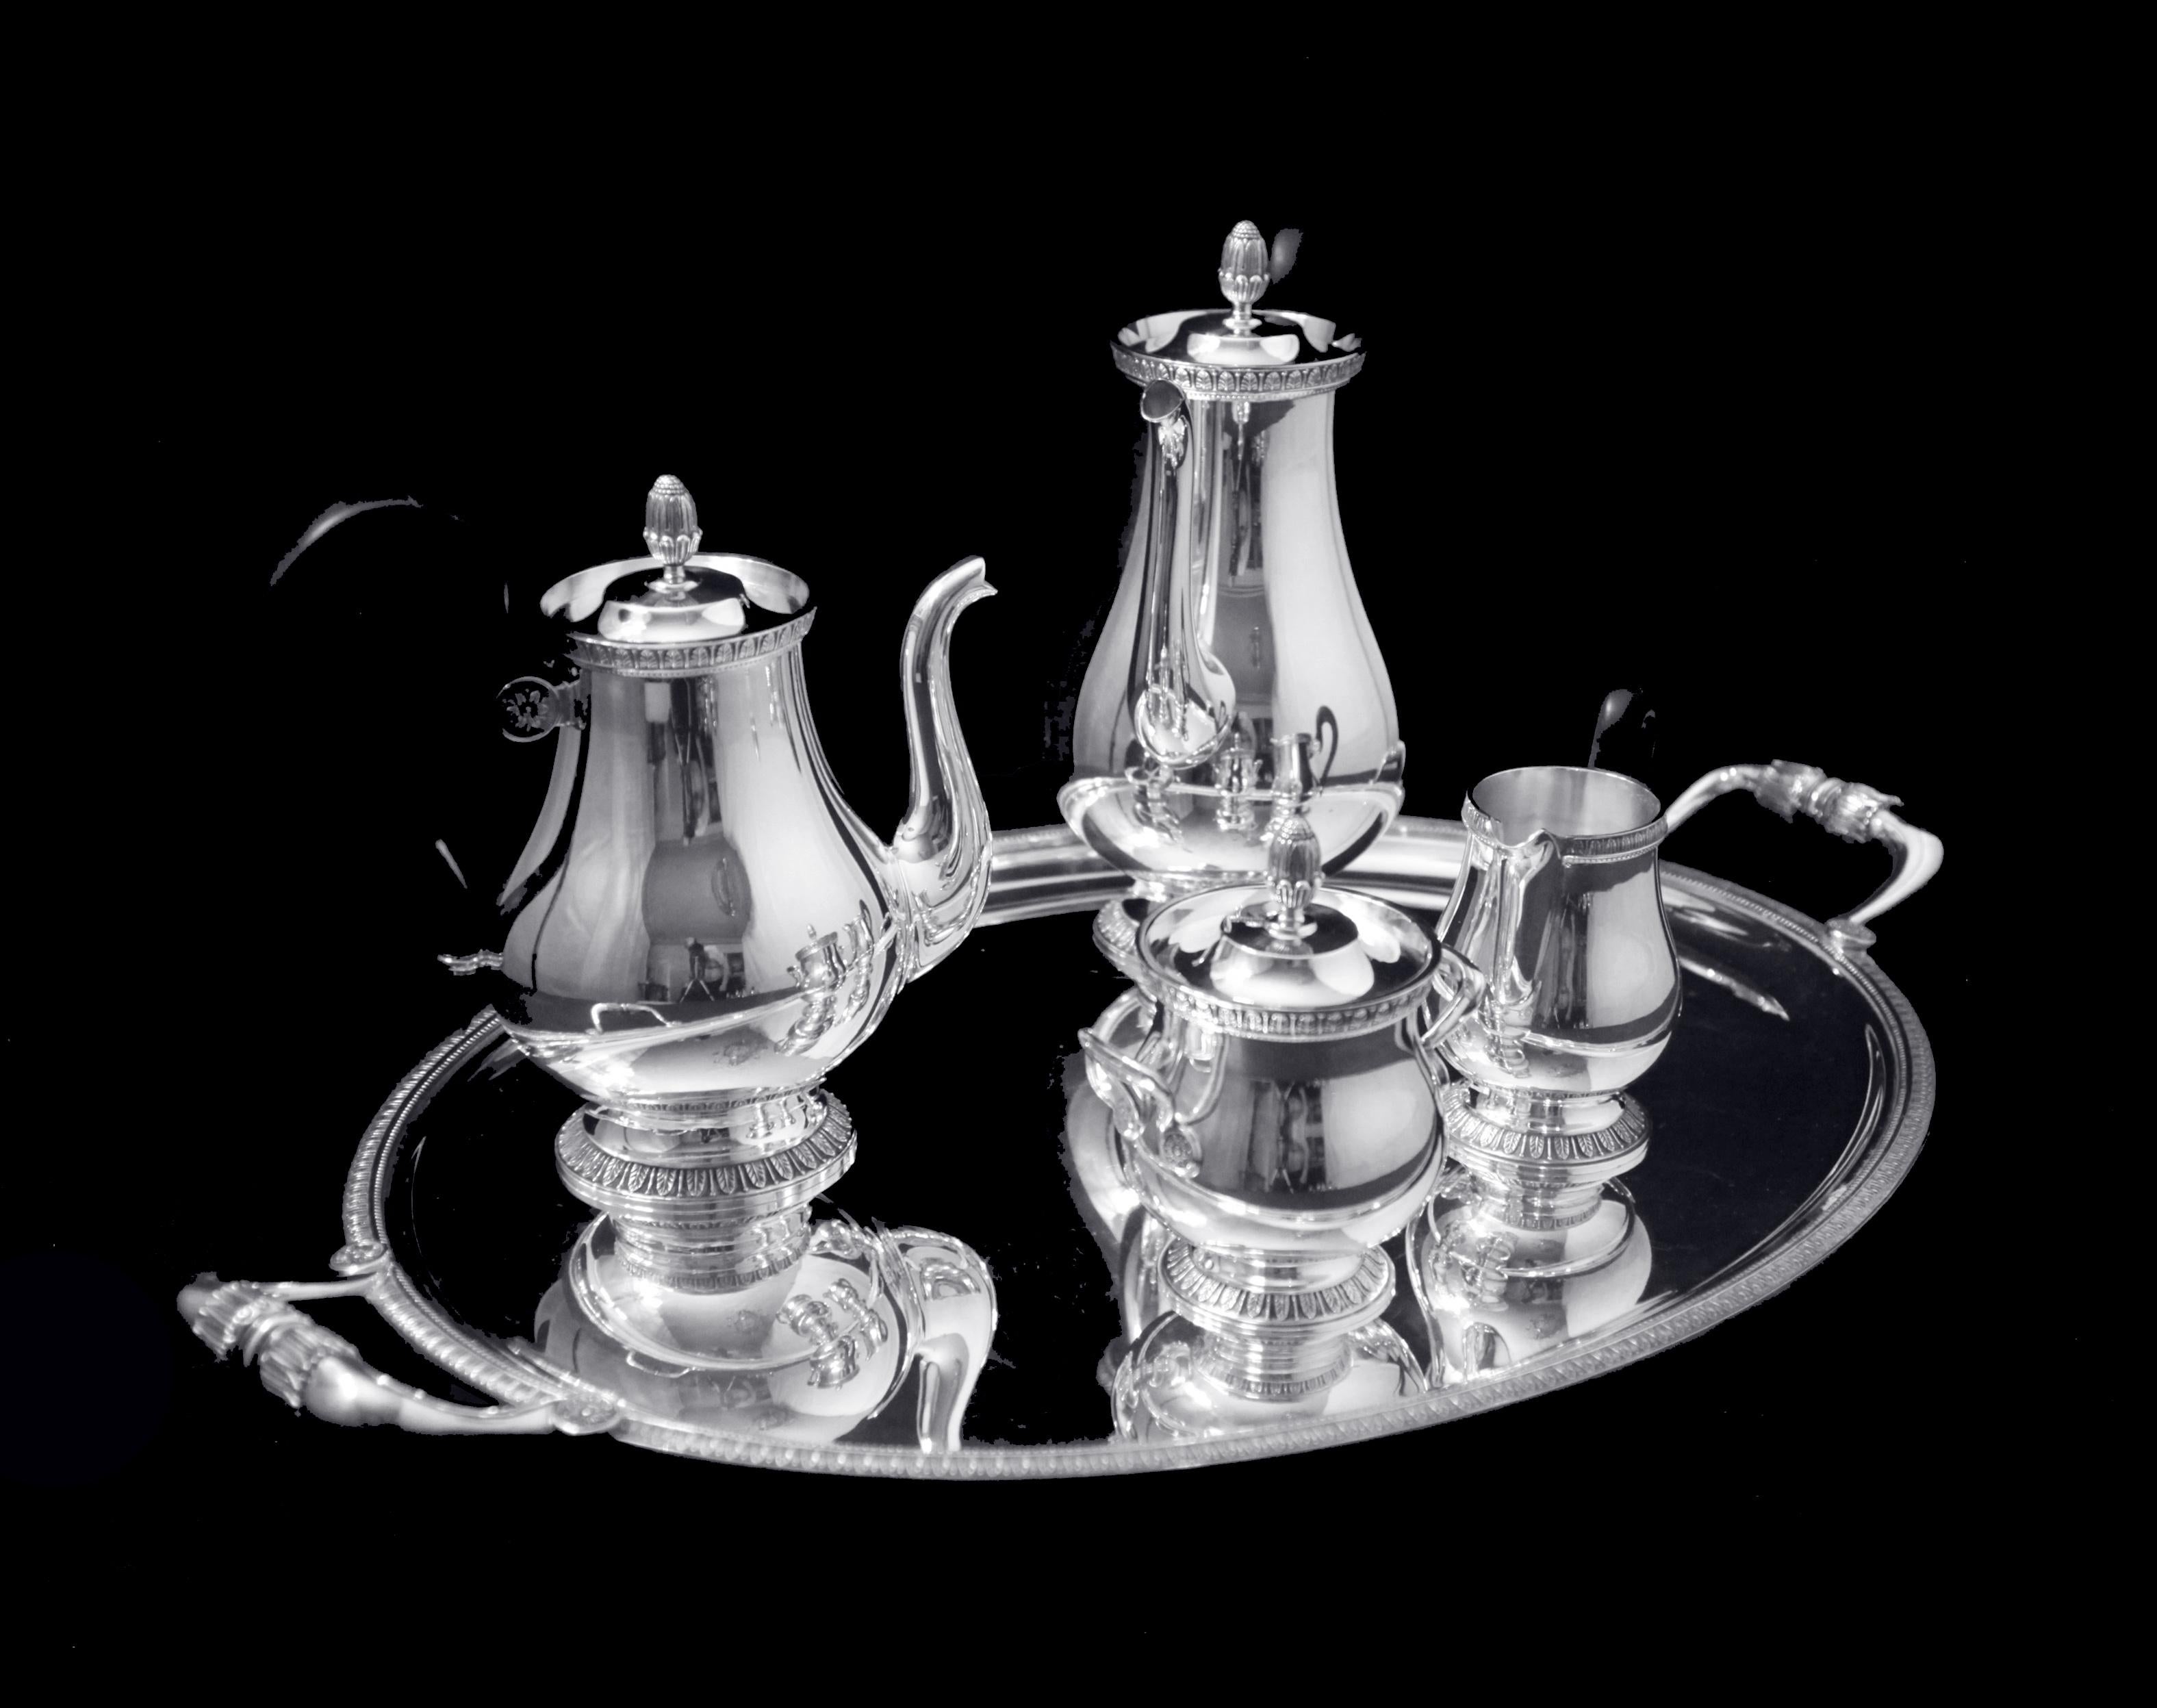 Direct from Paris, a magnificent 5 piece silver-plate Collection Gallia, Louis XVI model tea set by France’s premier silversmith “Christofle – Silversmith to the King” and each piece has been professionally refinished to like new condition – circa